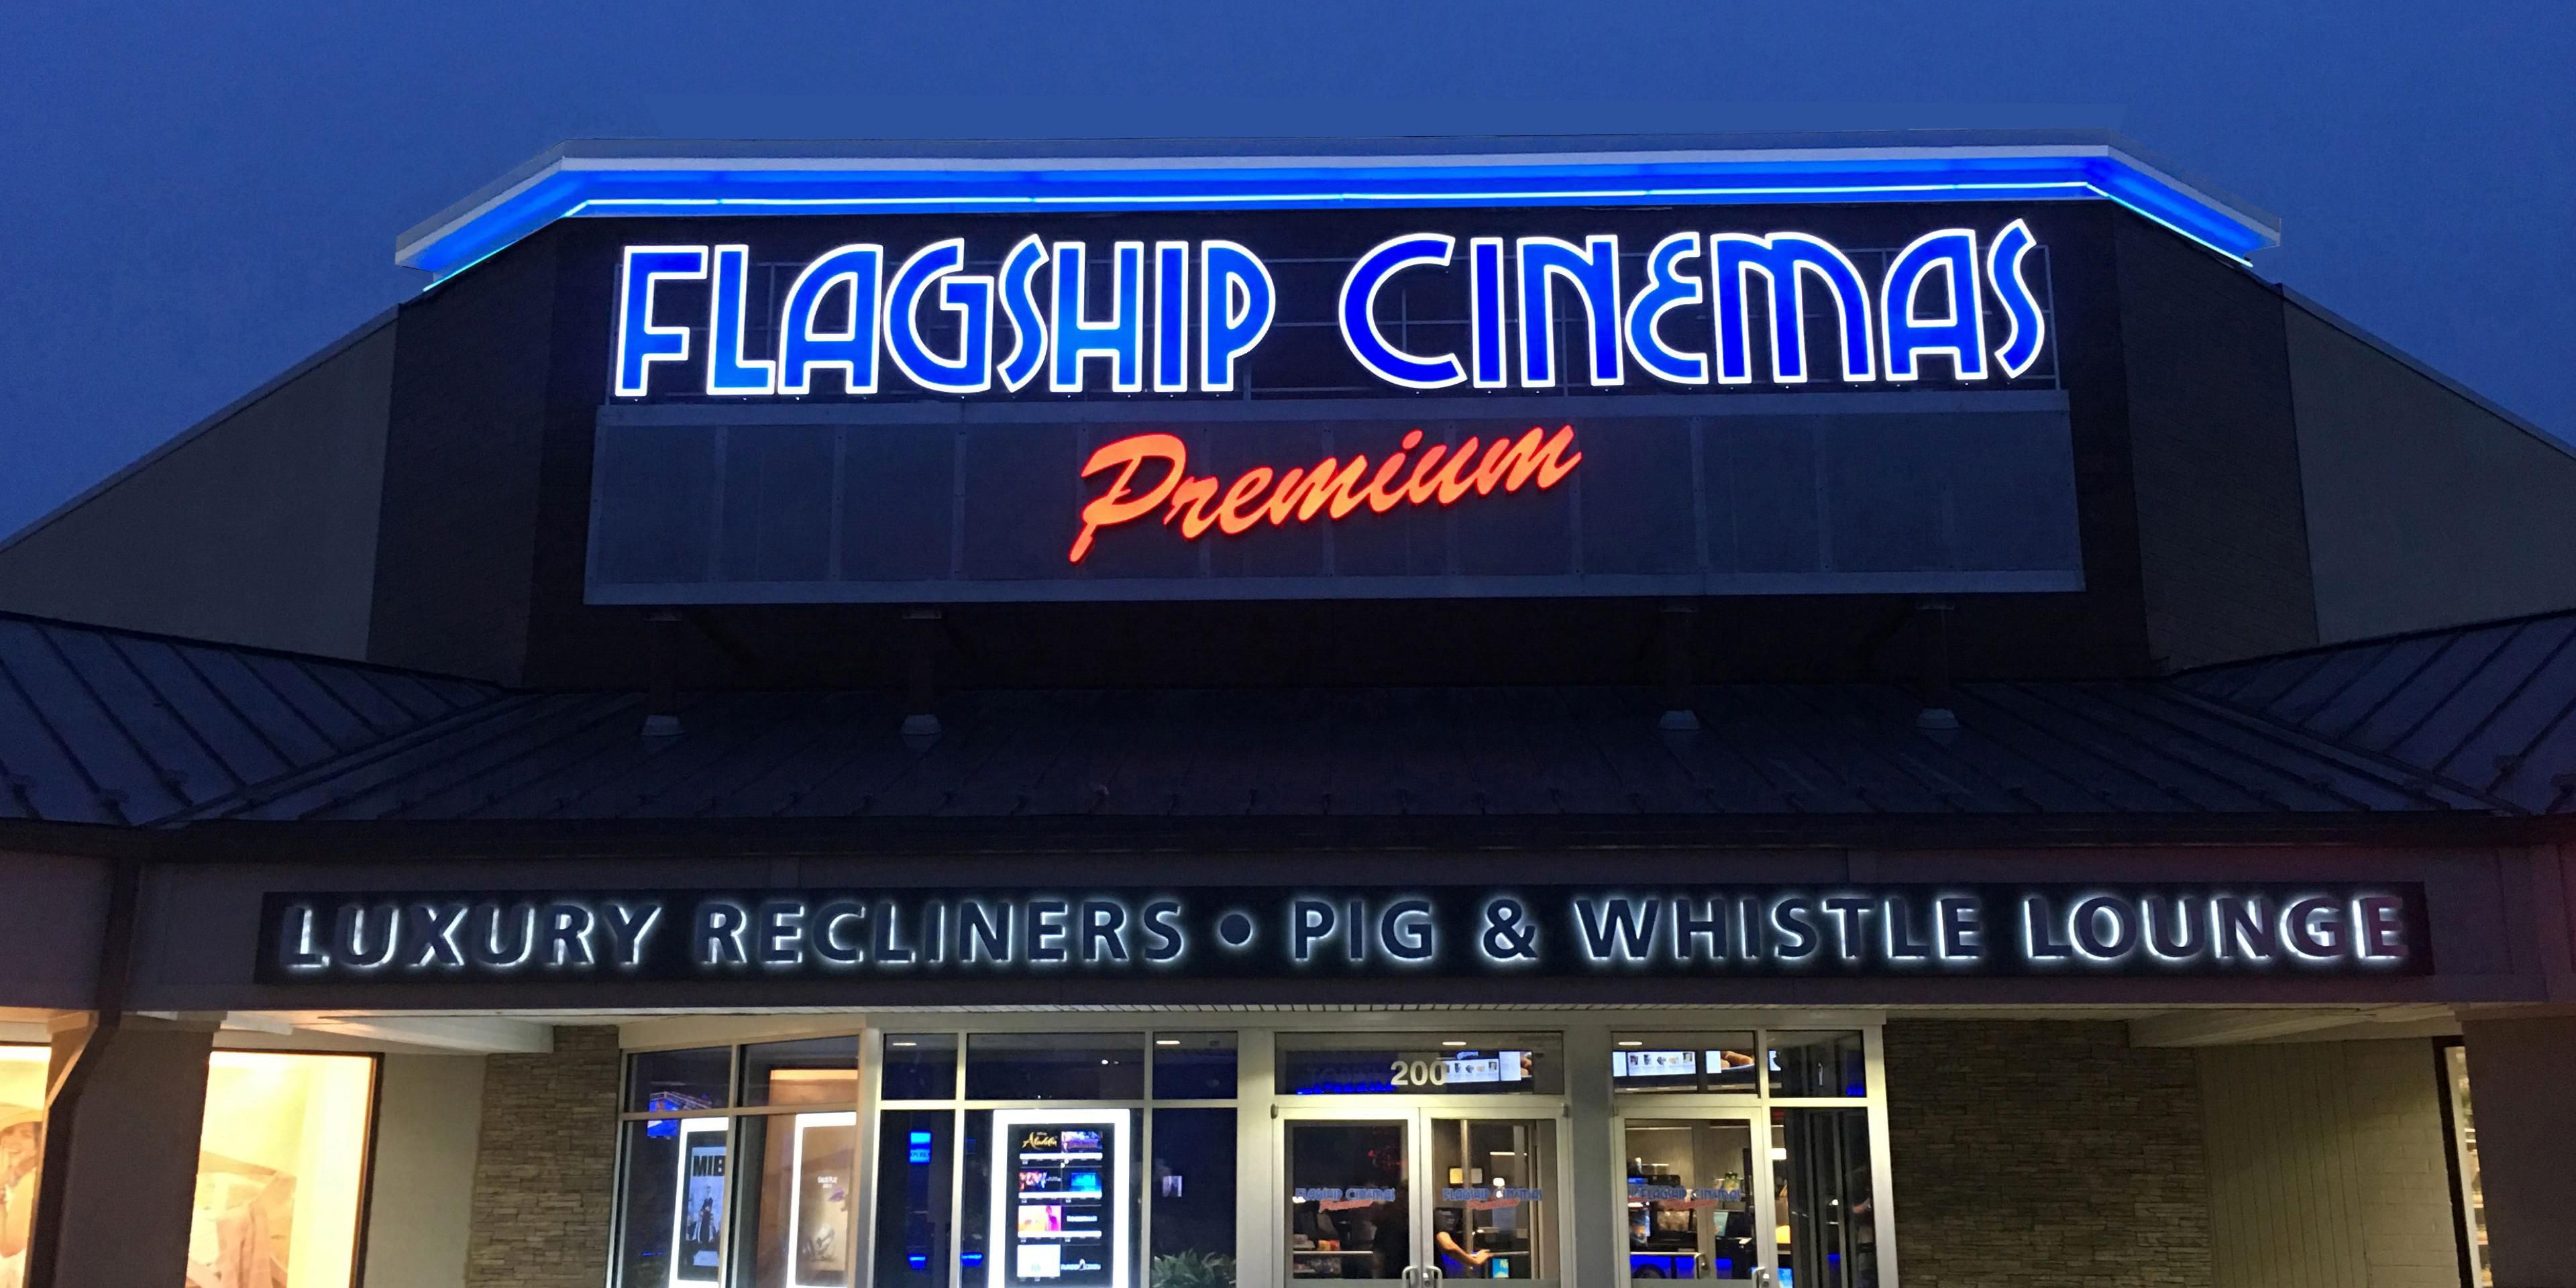 Catch the latest movie while in town at the friendly neighborhood Flagship Cinema.